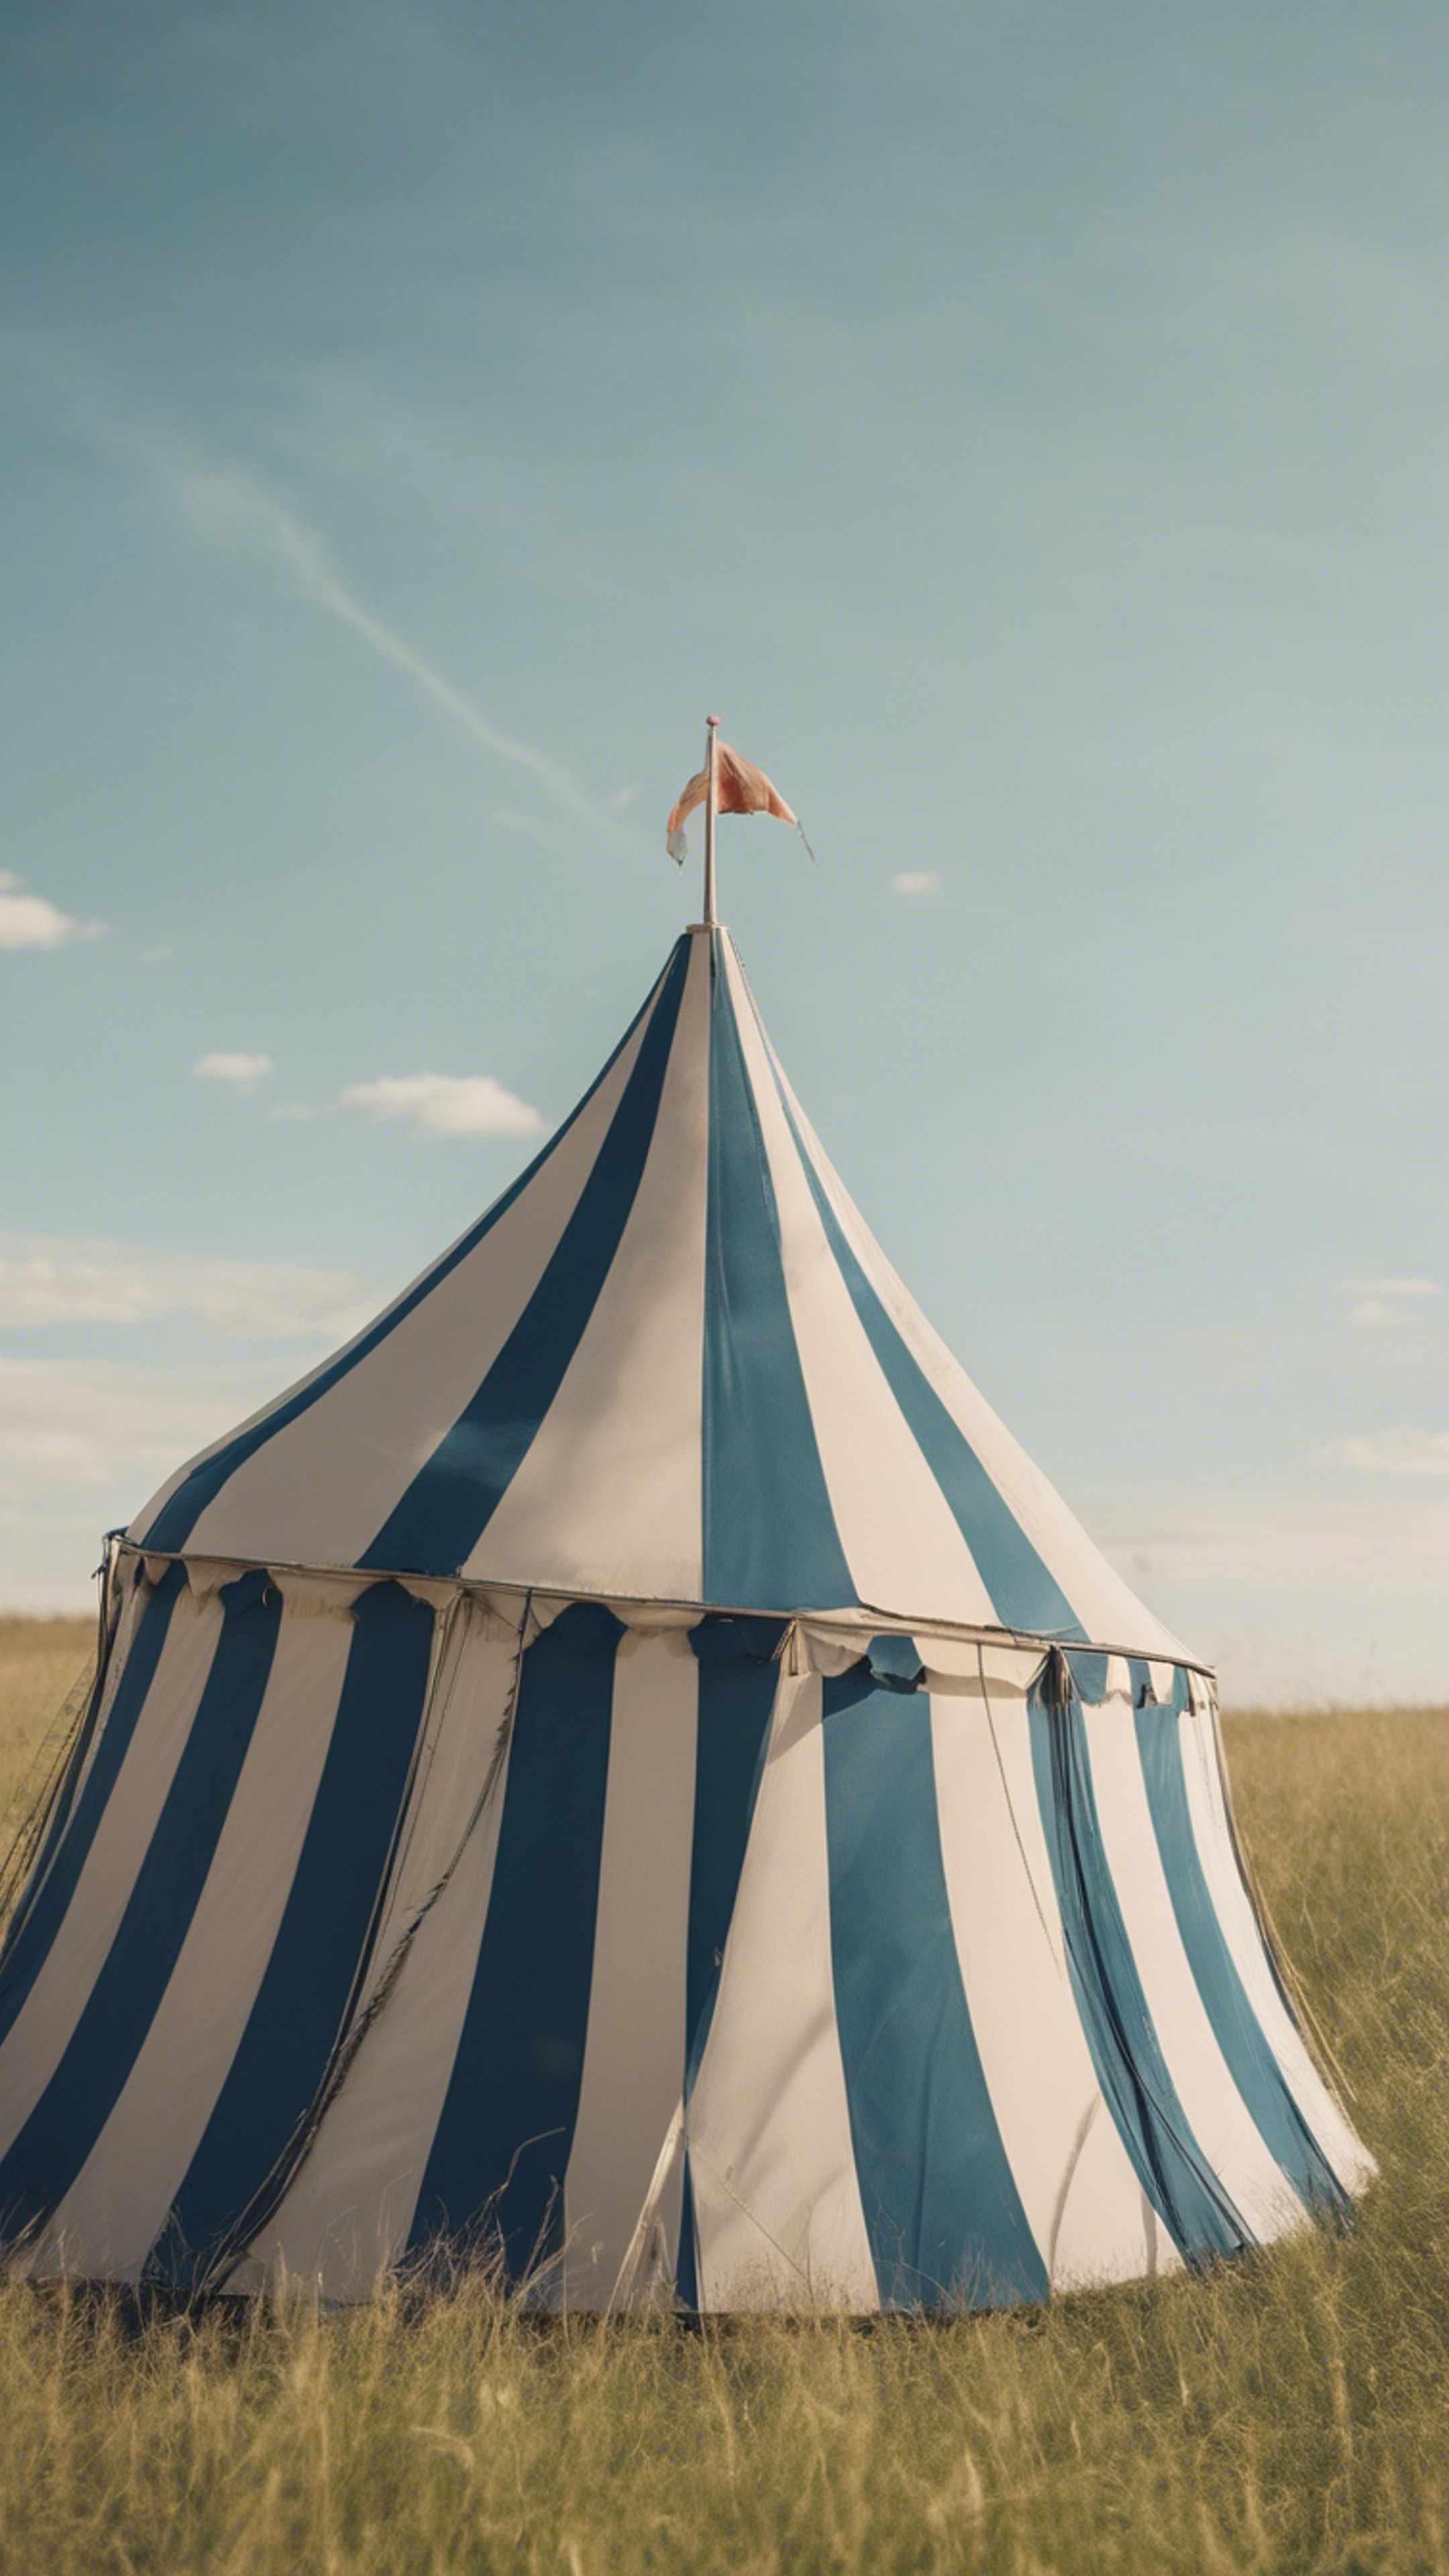 A vintage striped circus tent in a grassy field with a blue sky overhead. 牆紙[07d58b74cbfe41aa8350]